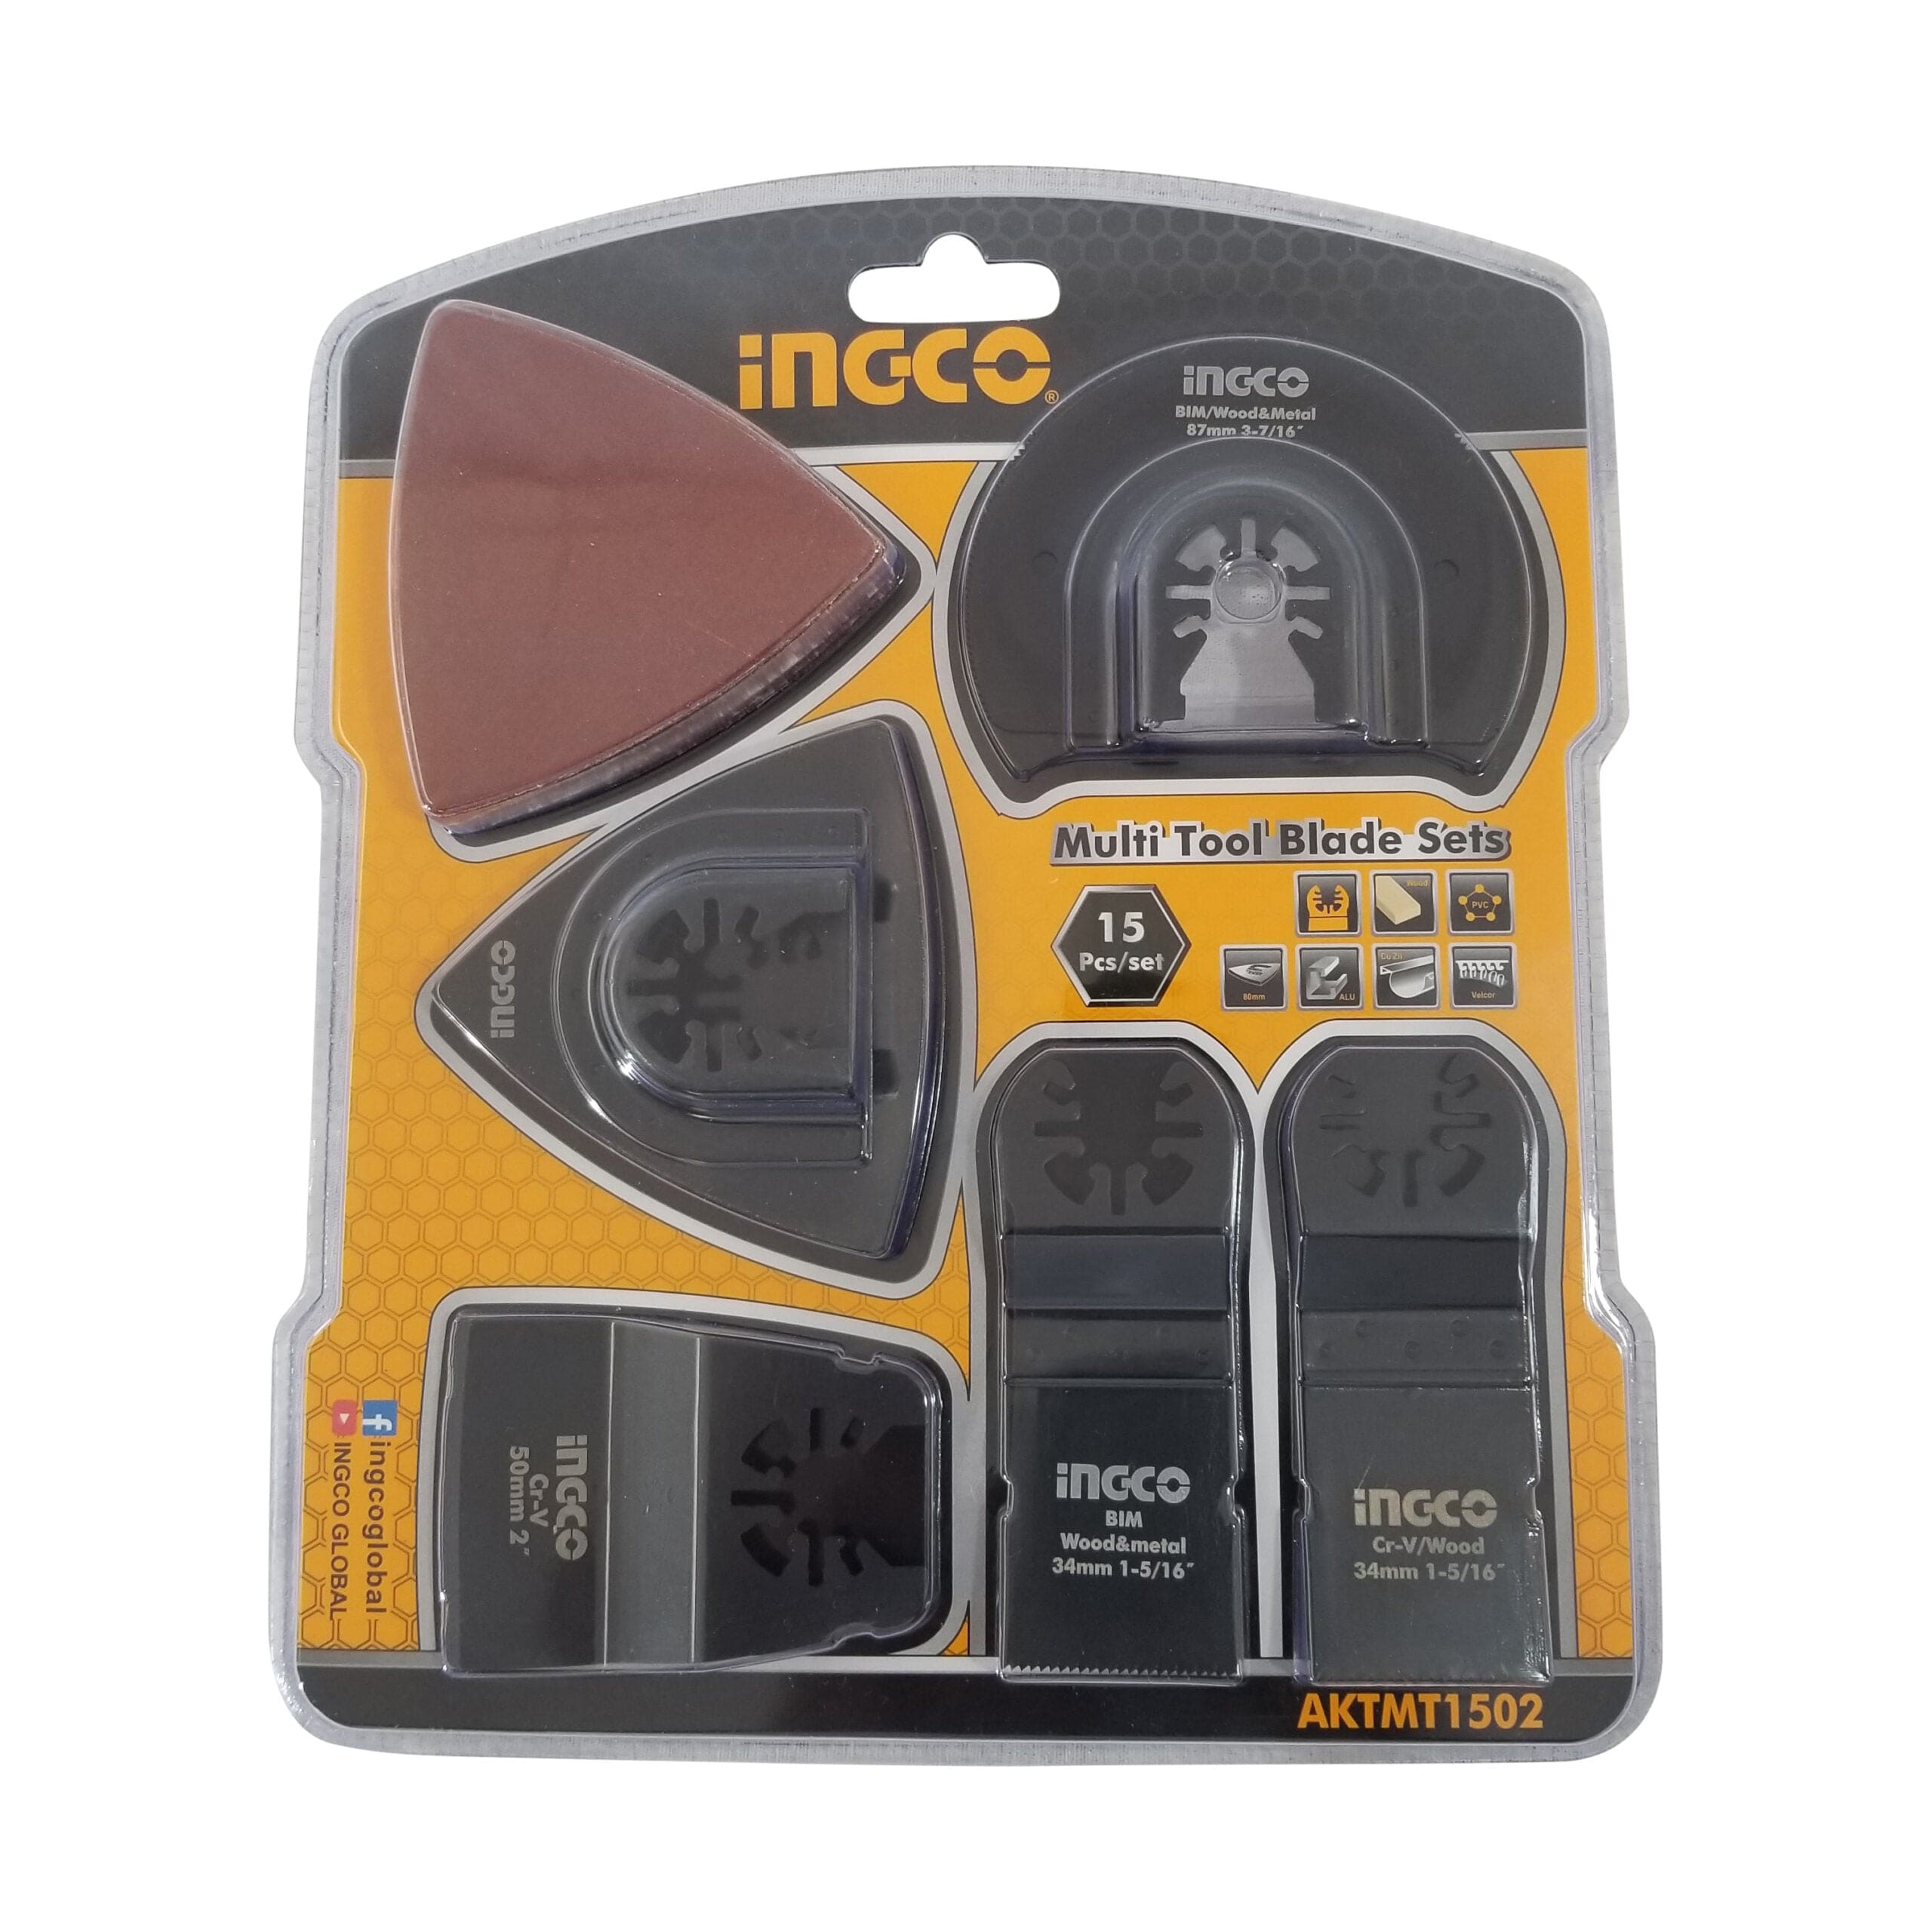 Ingco 15 Pieces Multi-Tool Blade Sets - AKTMT1502 | Supply Master | Accra, Ghana Oscillating Tool Accessories Buy Tools hardware Building materials